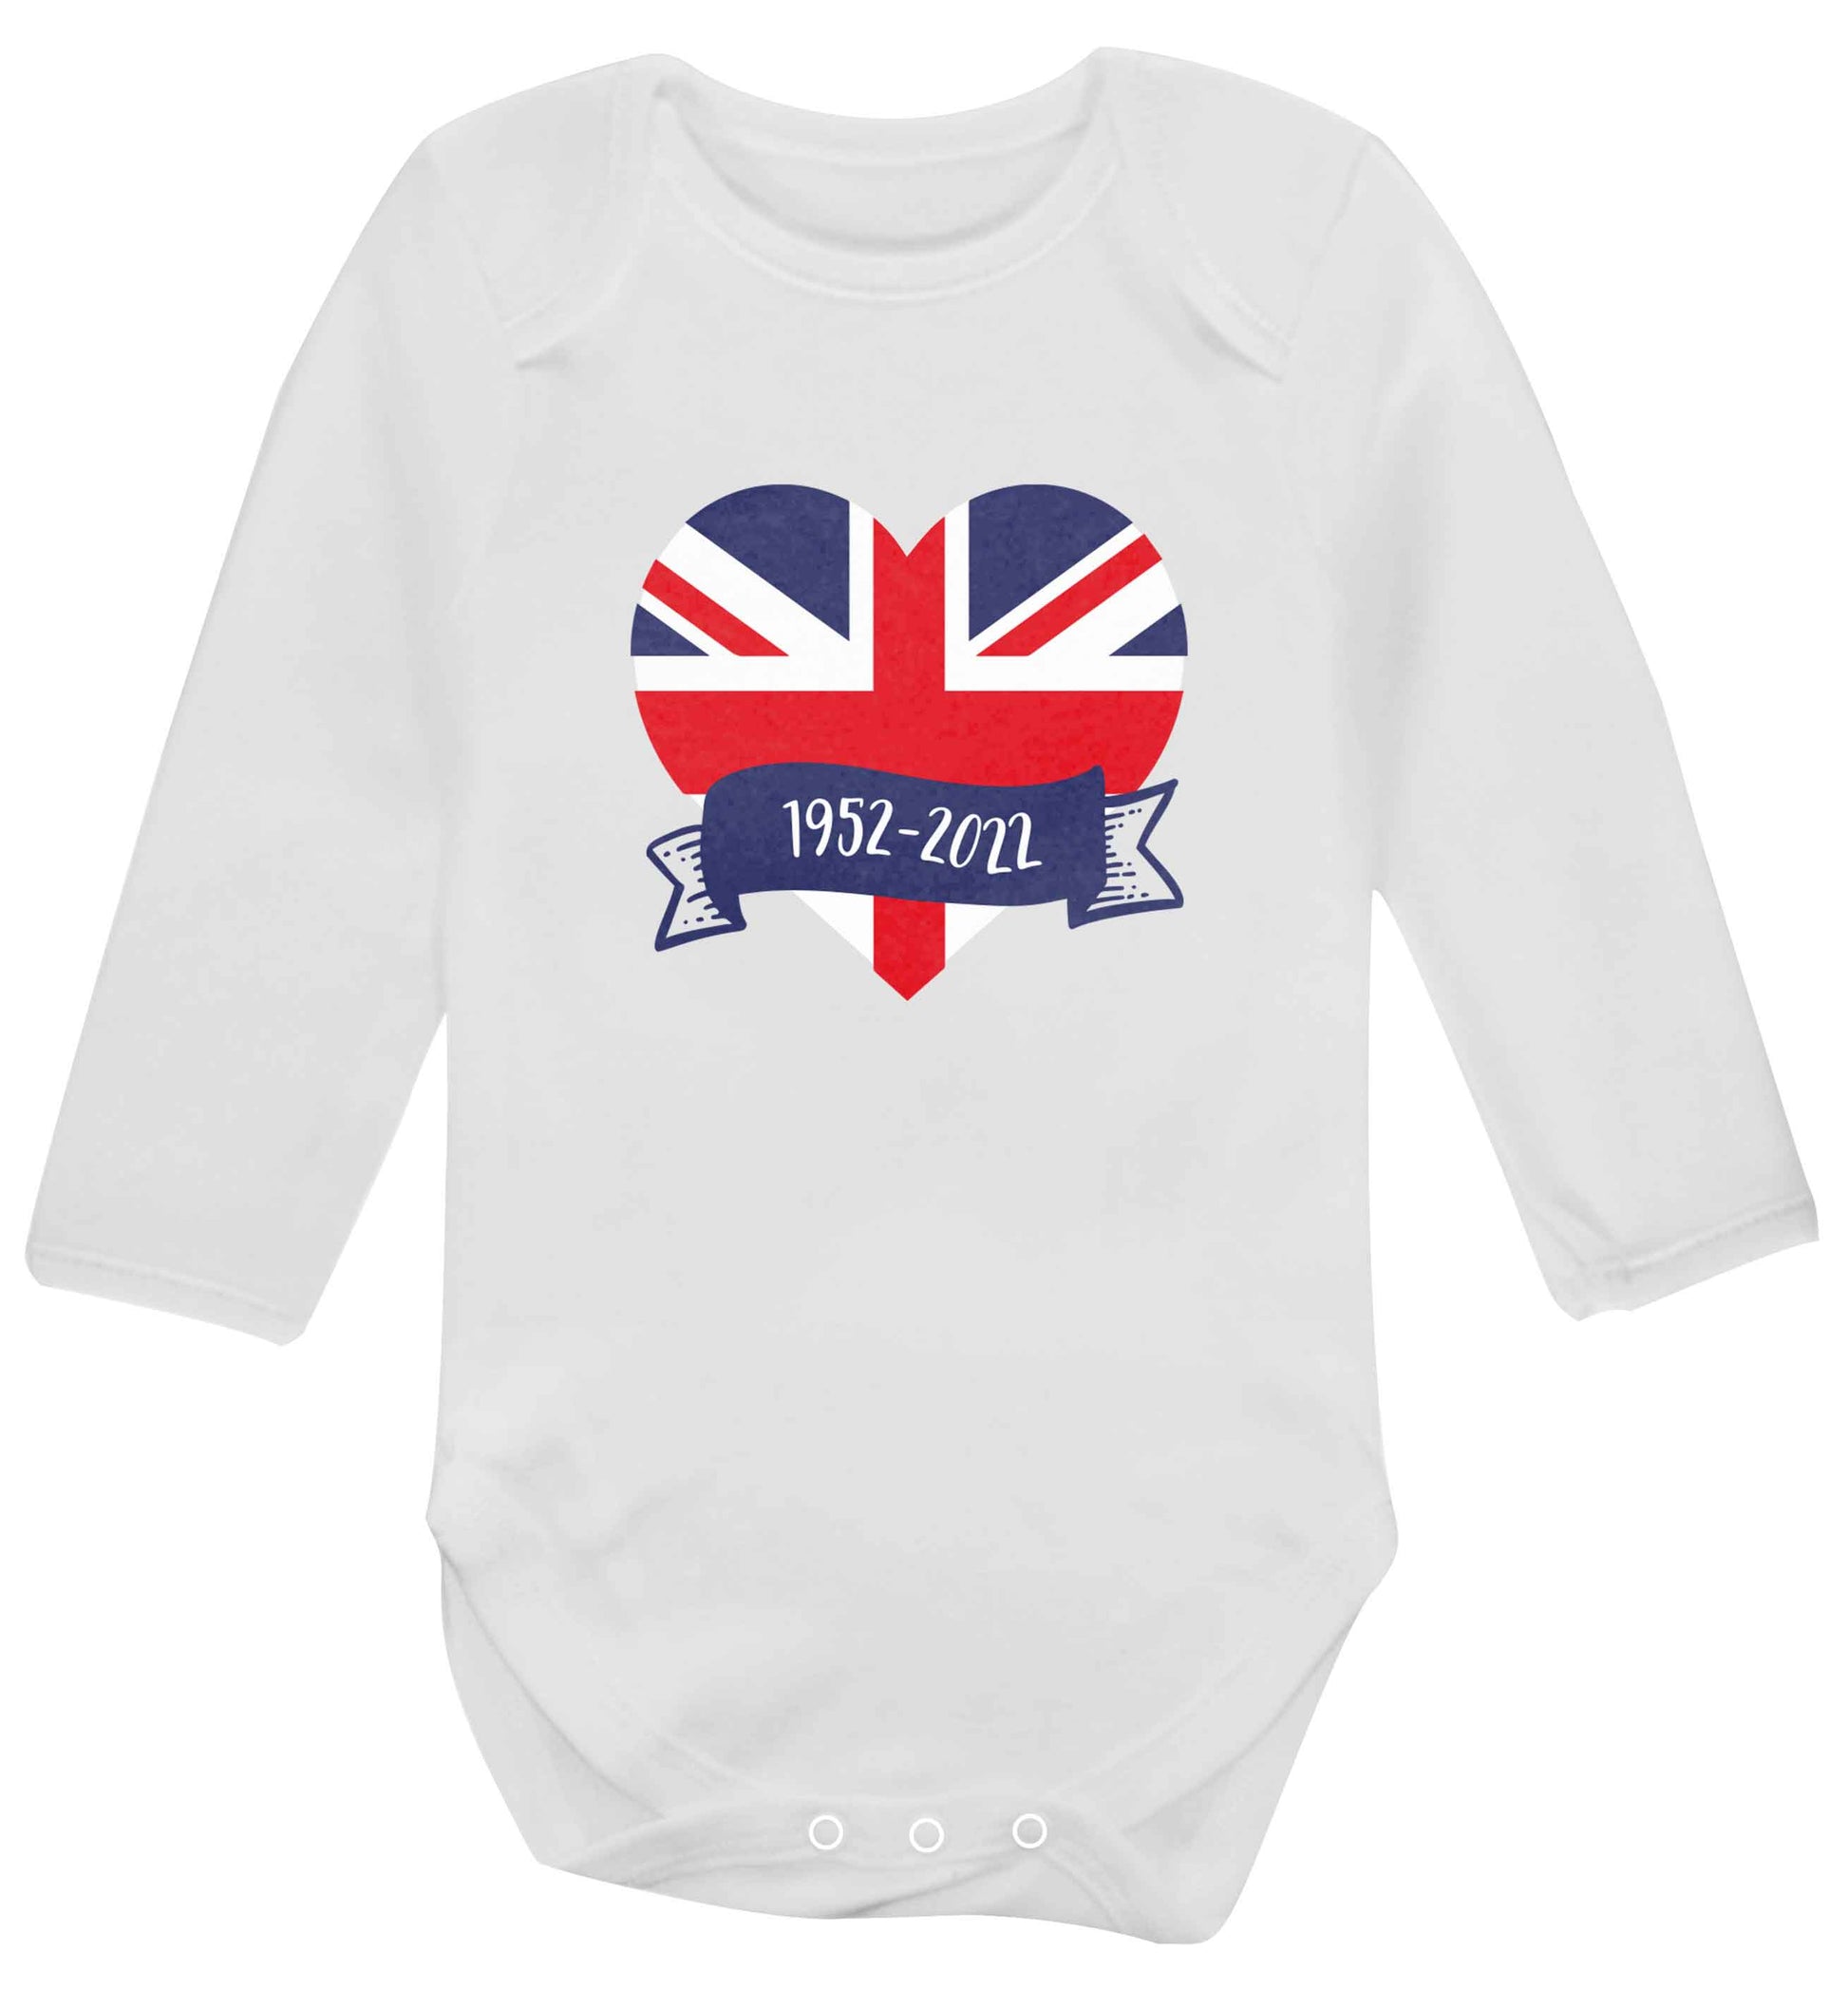 British flag heart Queens jubilee baby vest long sleeved white 6-12 months